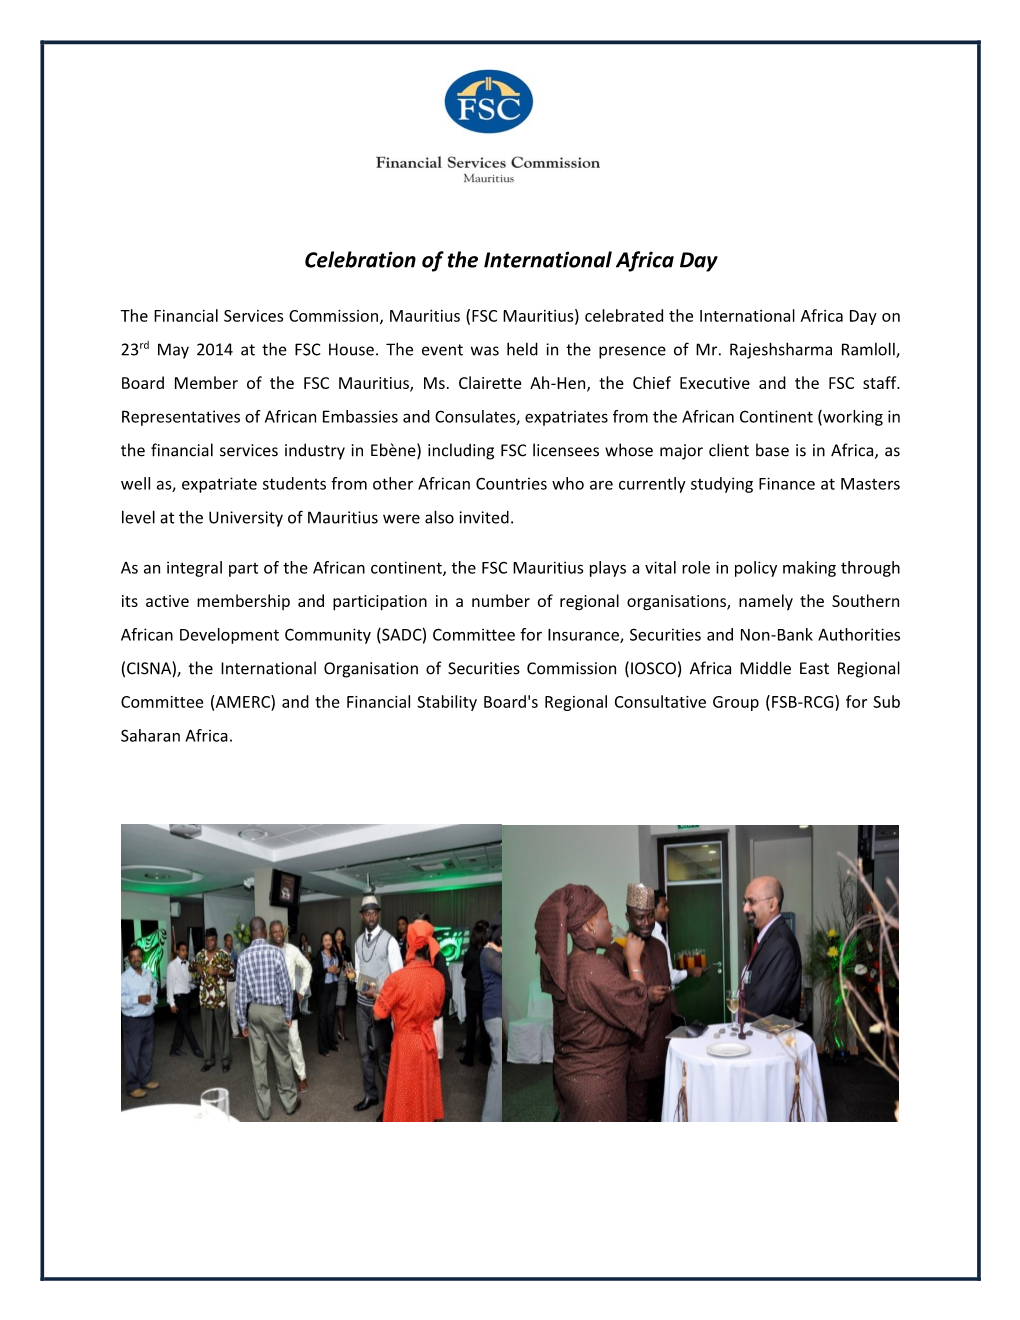 FSC Mauritius) Celebrated the International Africa Day on 23Rd May 2014 at the FSC House